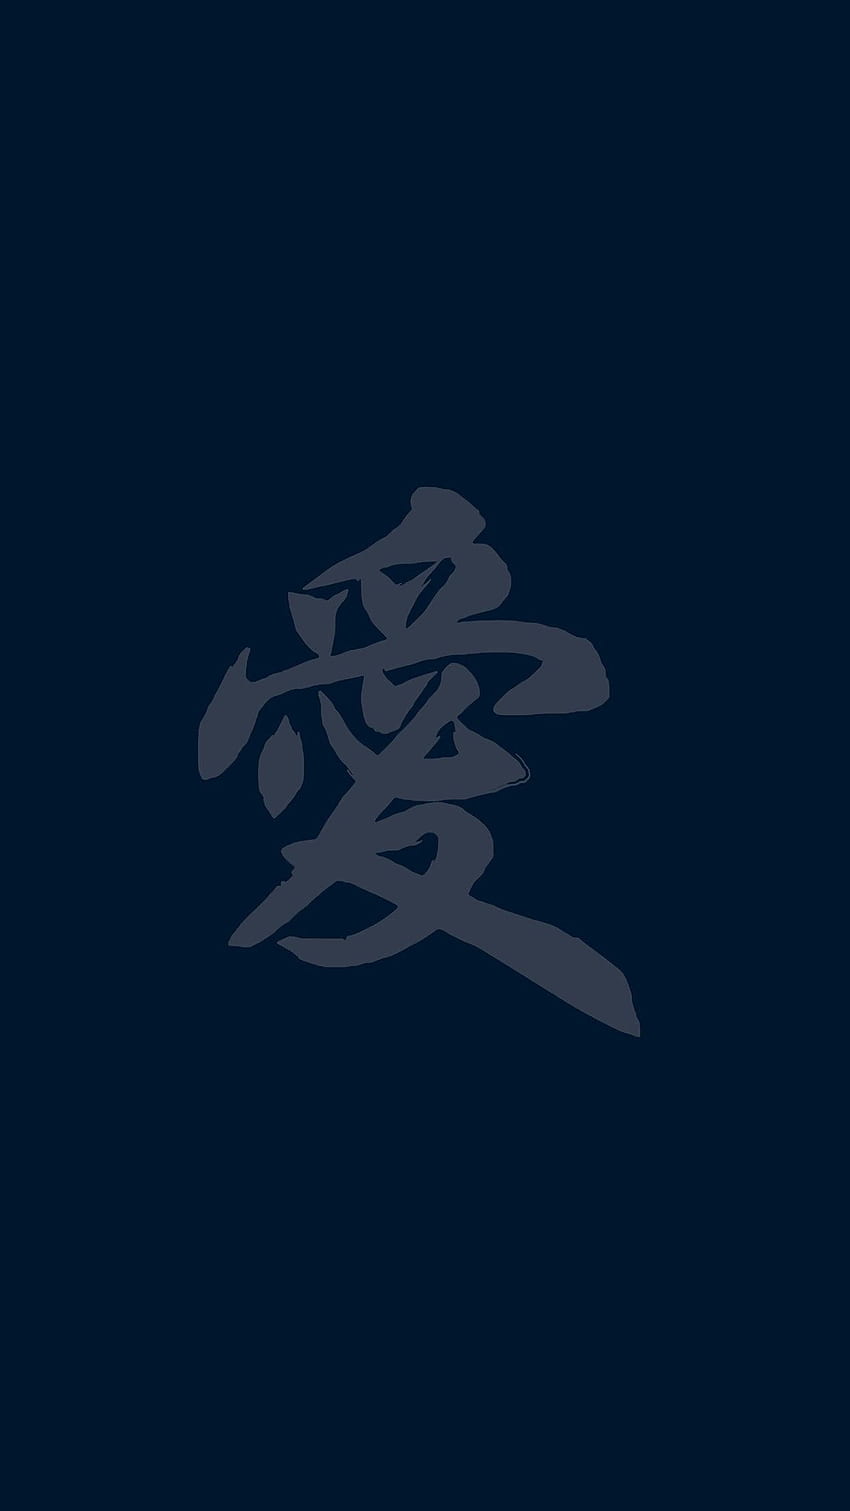 Kanji wallpapers for desktop download free Kanji pictures and backgrounds  for PC  moborg